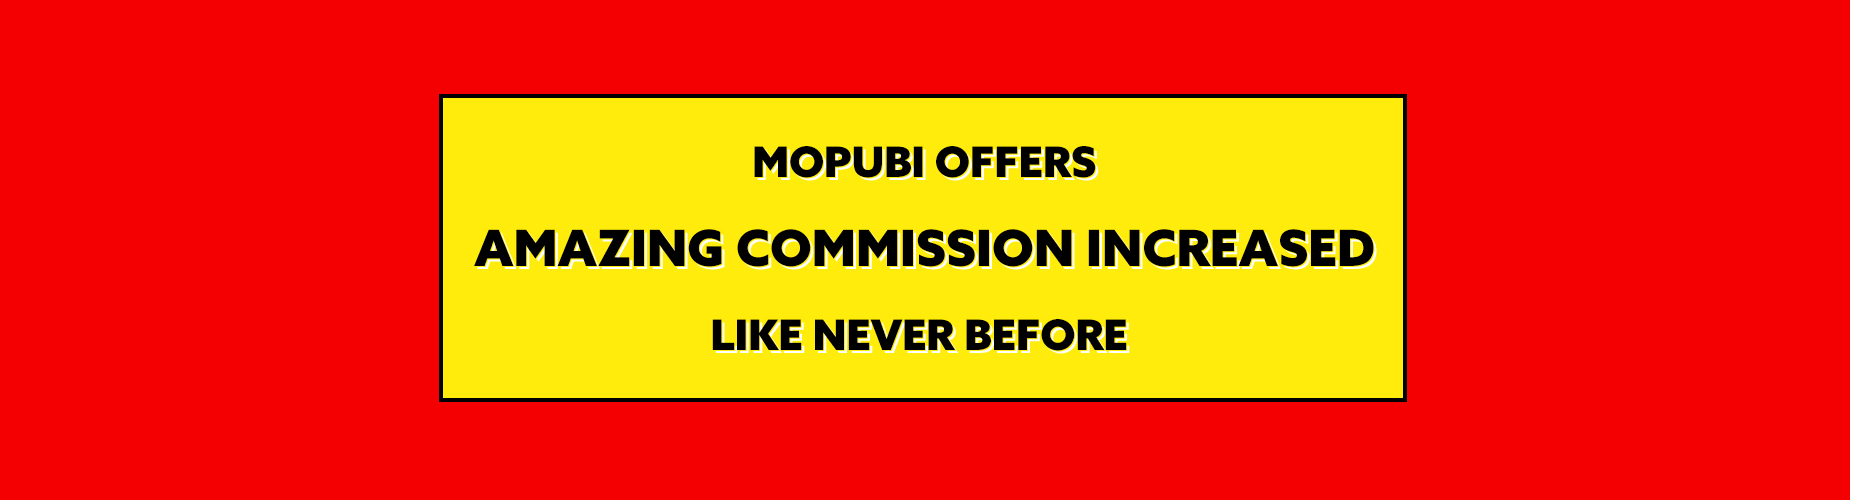 MOPUBI-OFFERS_AMAZING-COMMISSION-INCREASED_LIKE-NEVER-BEFORE.jpg